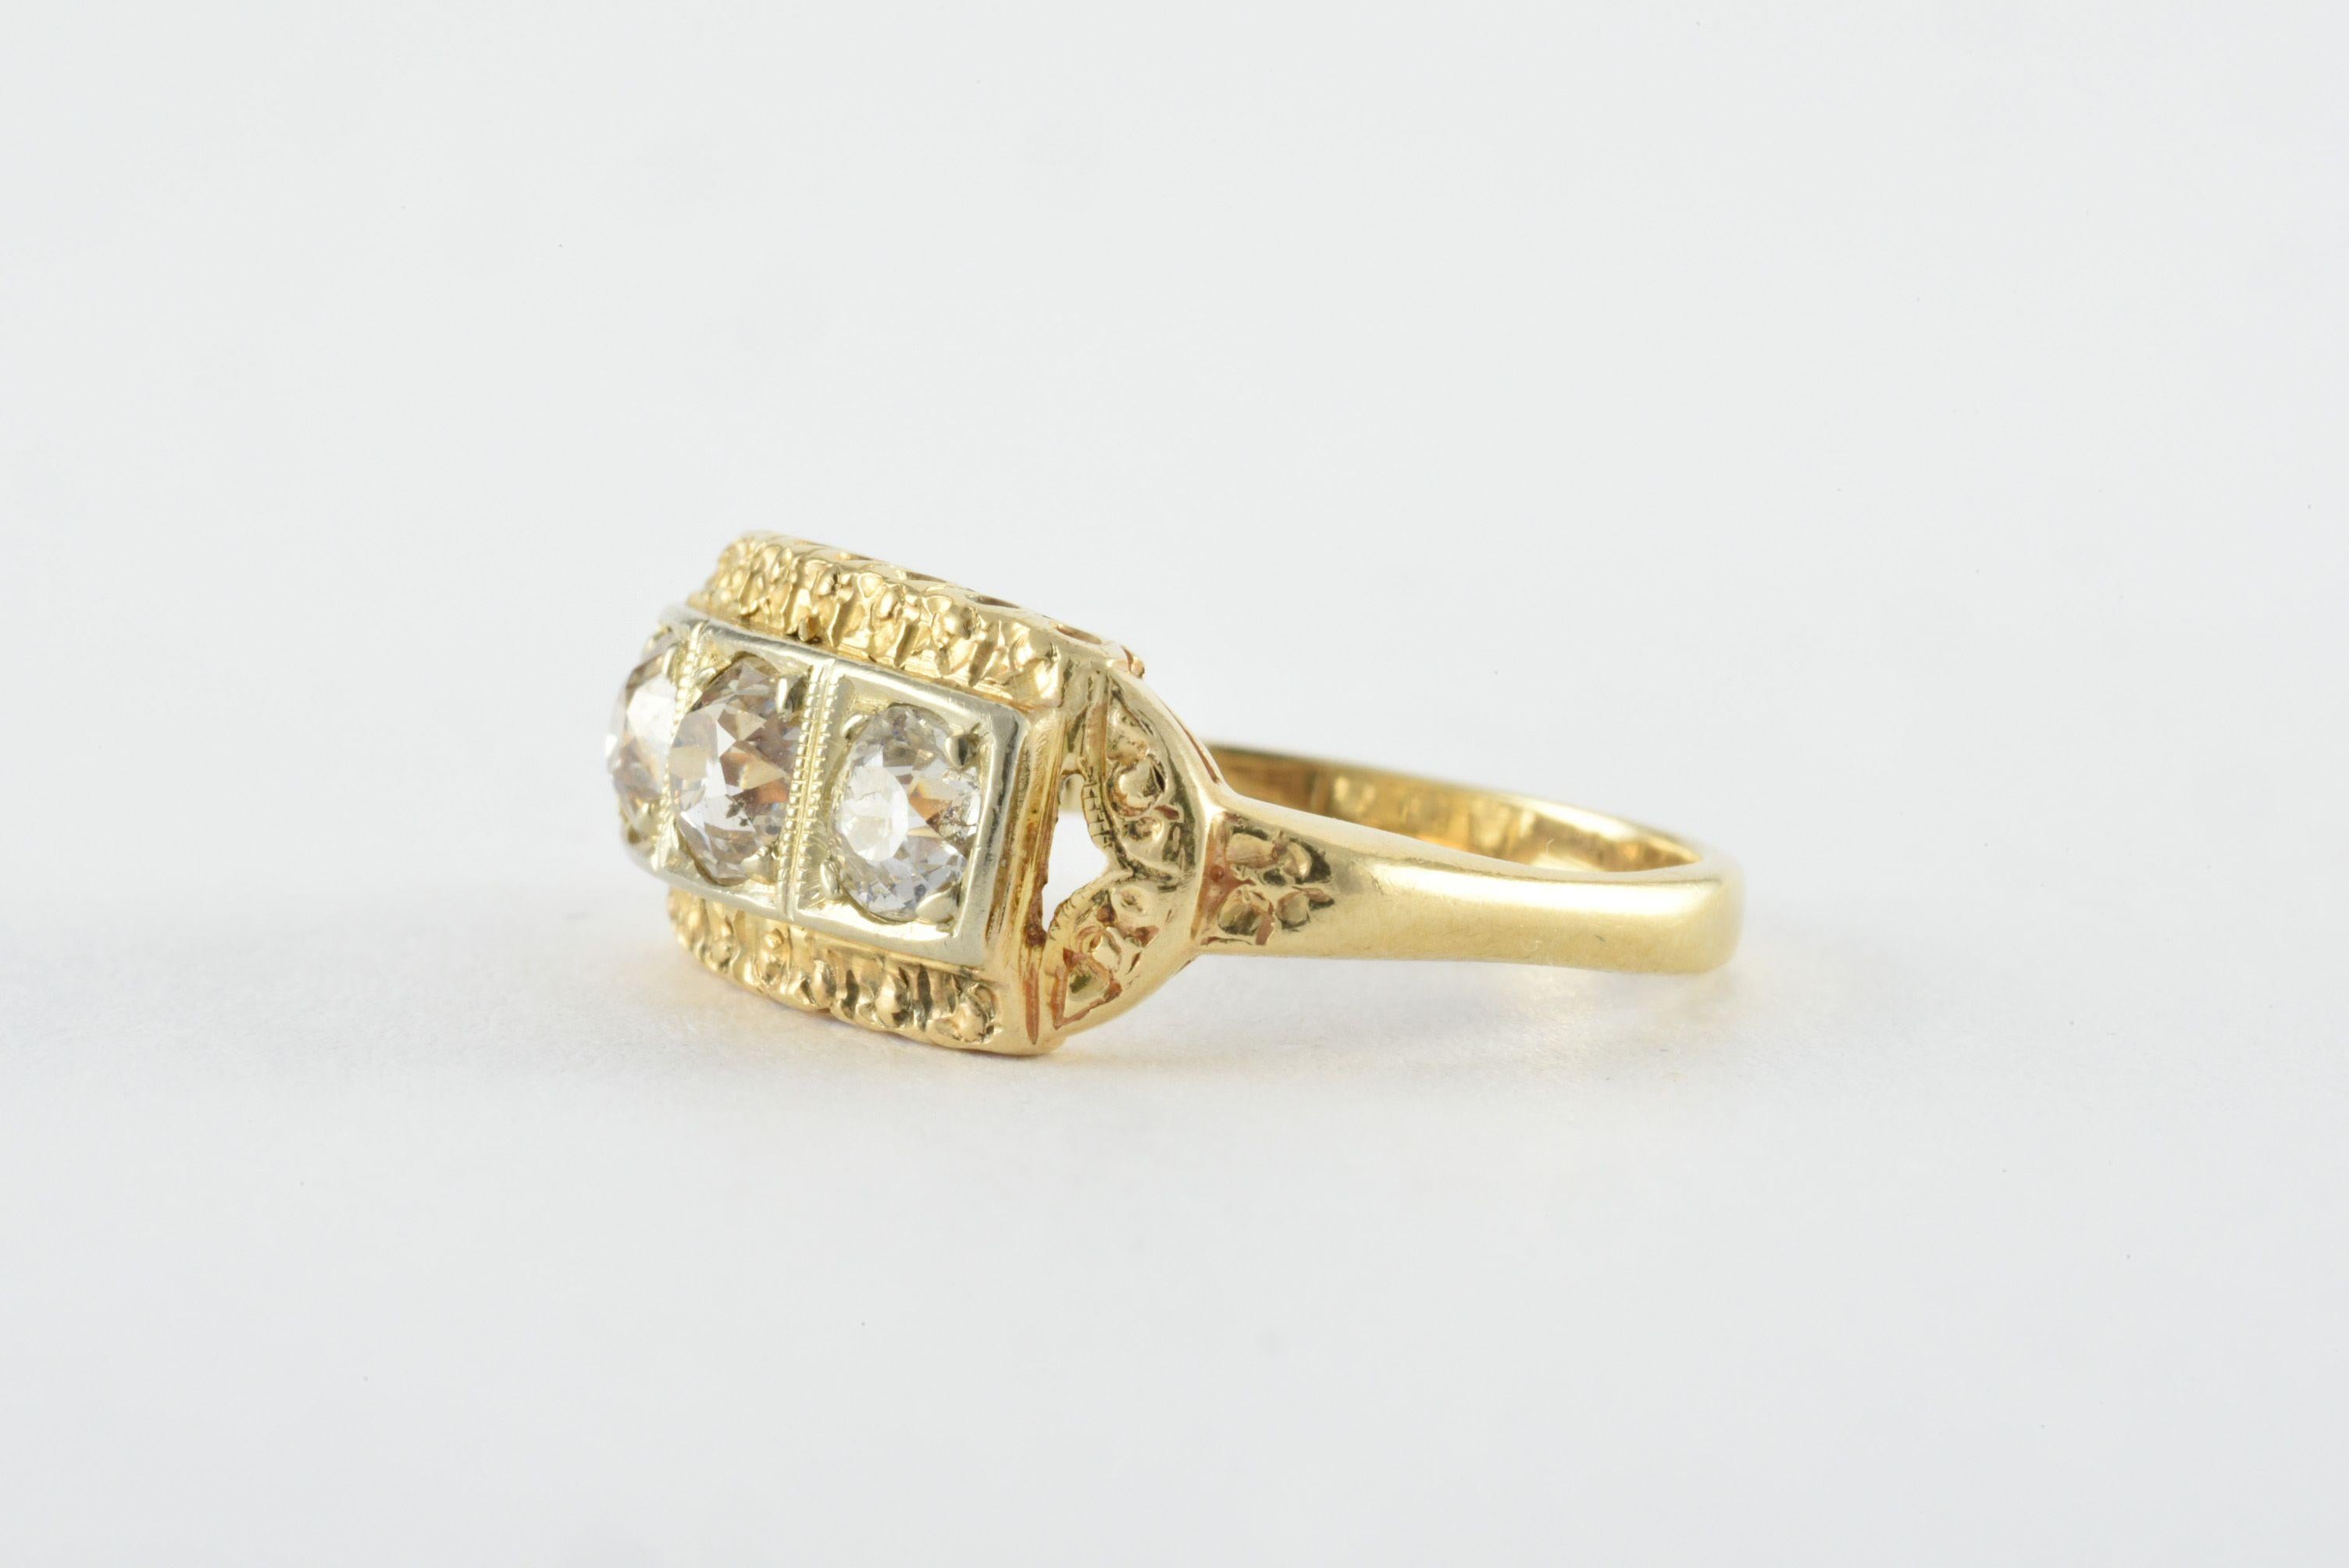 A trio of Old European cut diamonds set in 14kt white gold totaling approximately 0.75 carats, J-K color, SI2 clarity, elegantly line this vintage band crafted from 14kt yellow gold and elaborate etching. 
